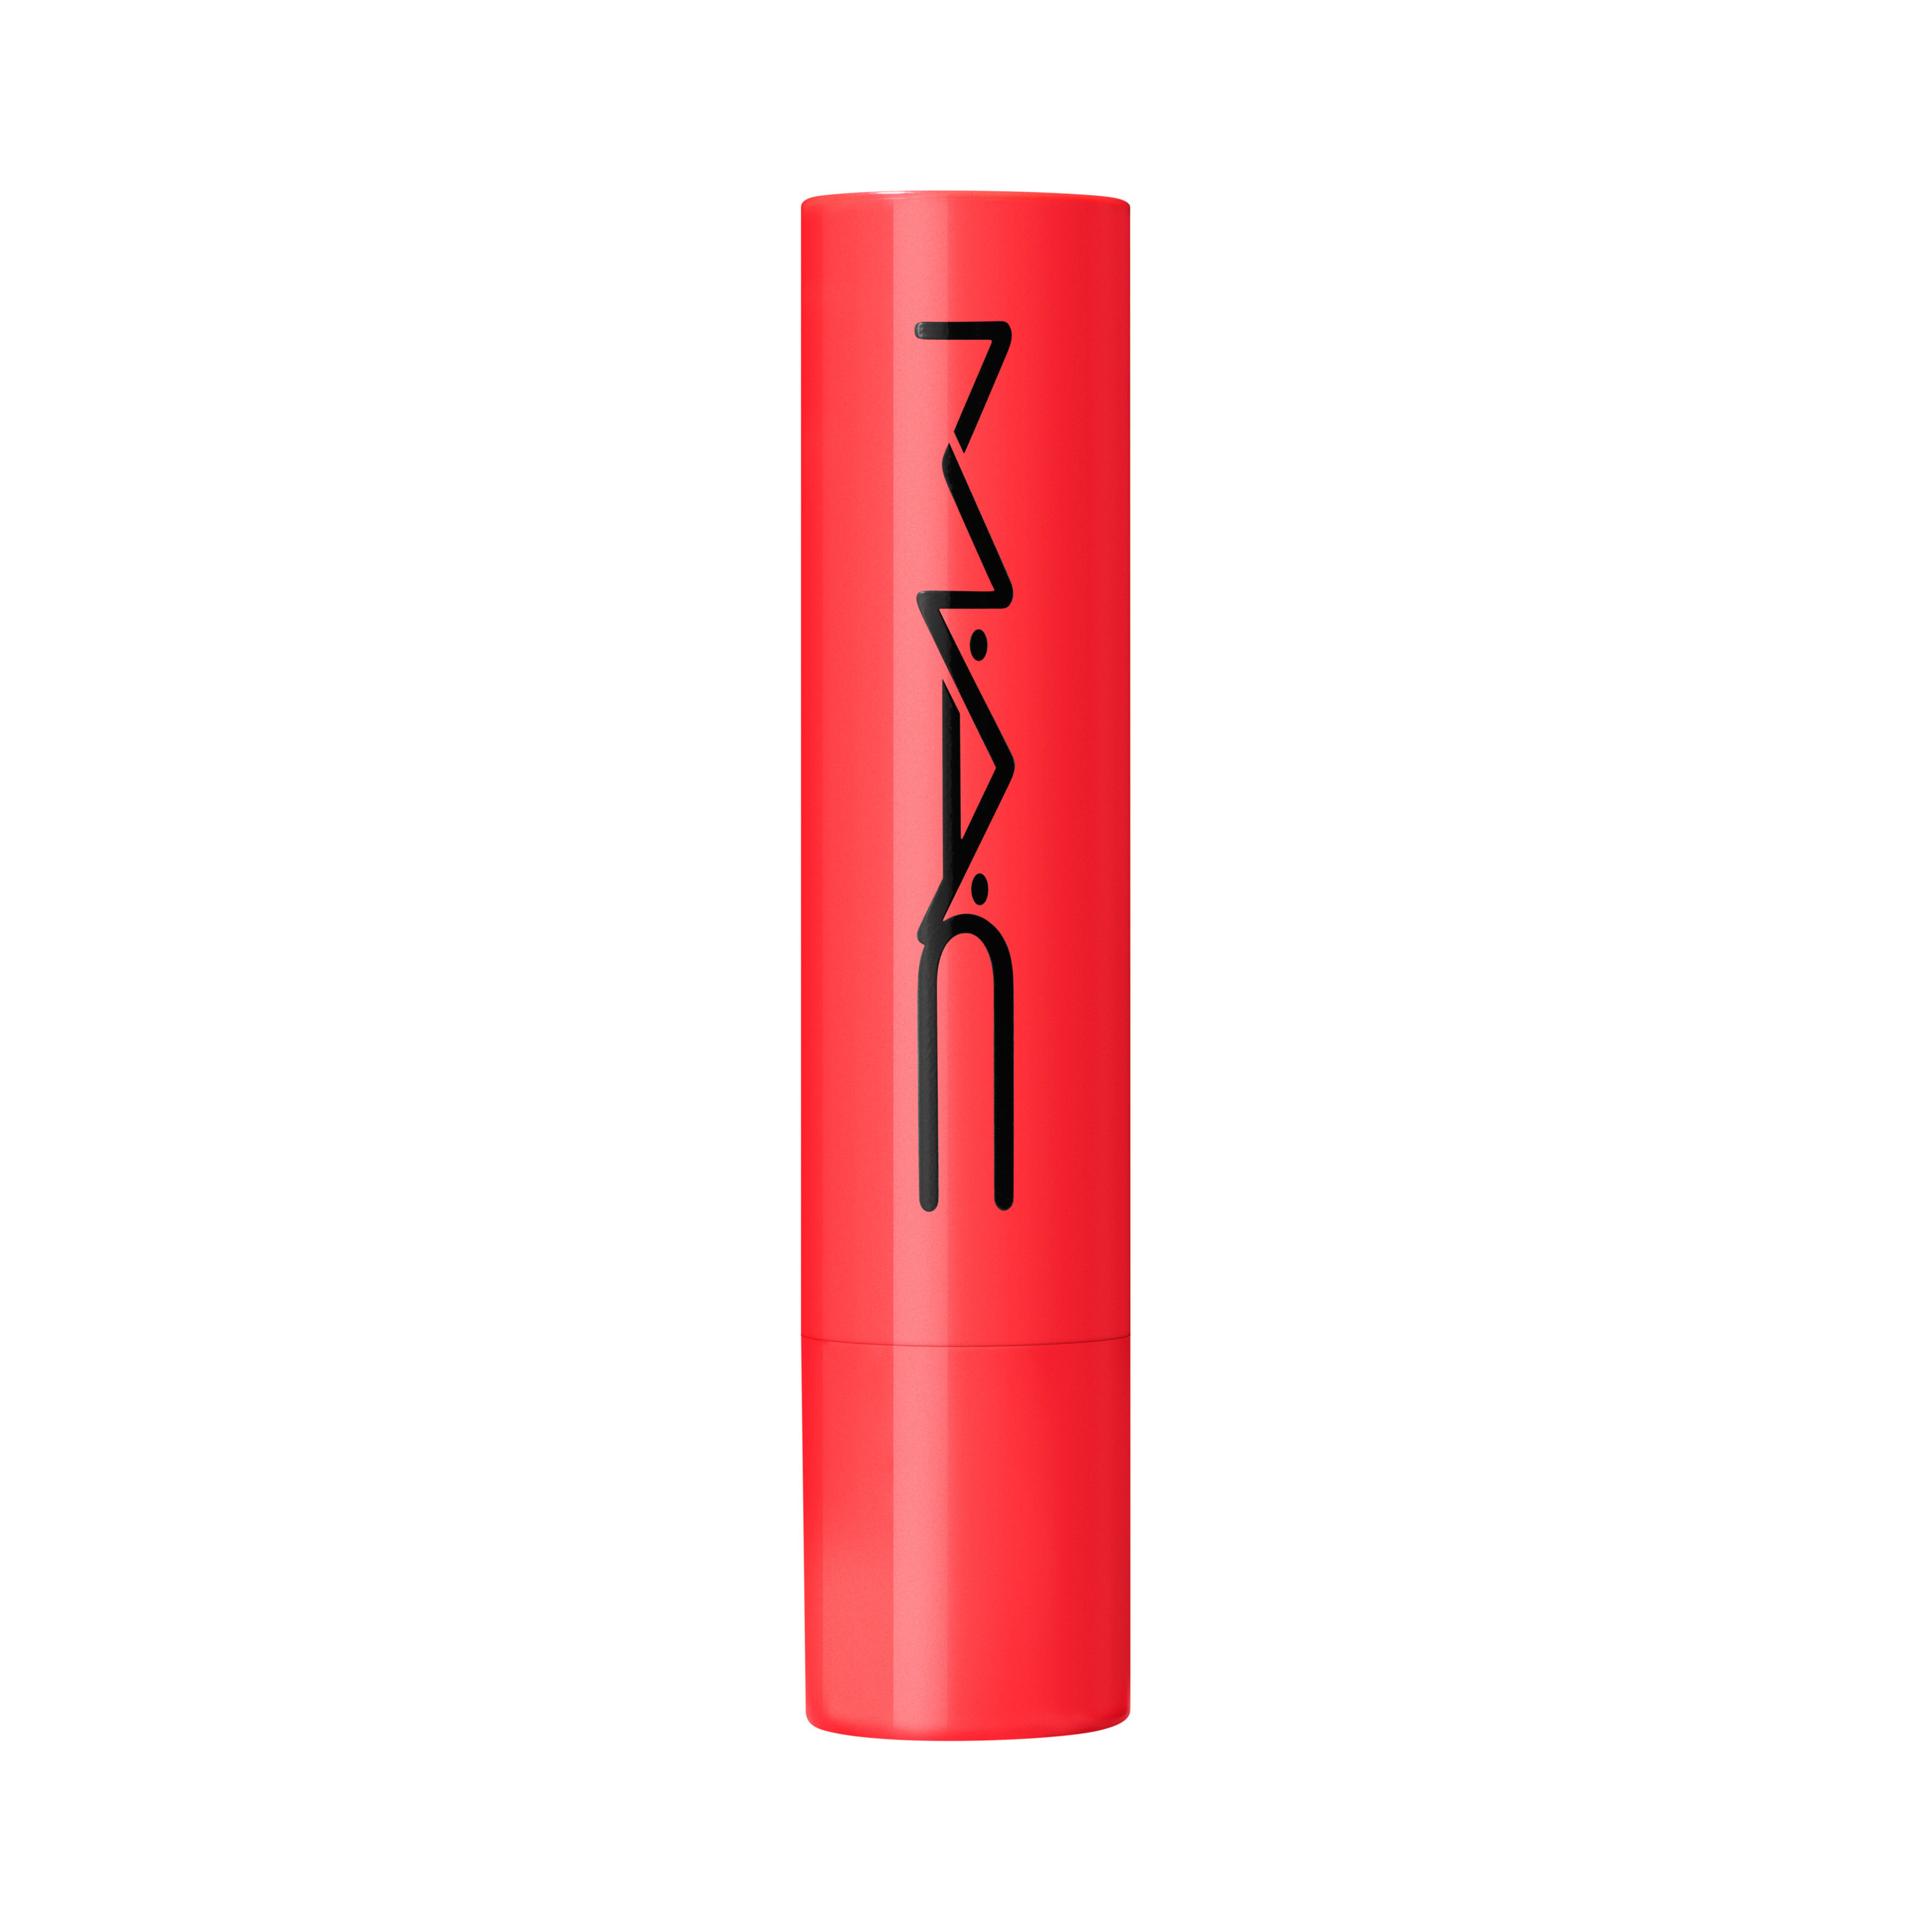 Squirt plumping gloss stick - Heat Sensor, Red, large image number 1